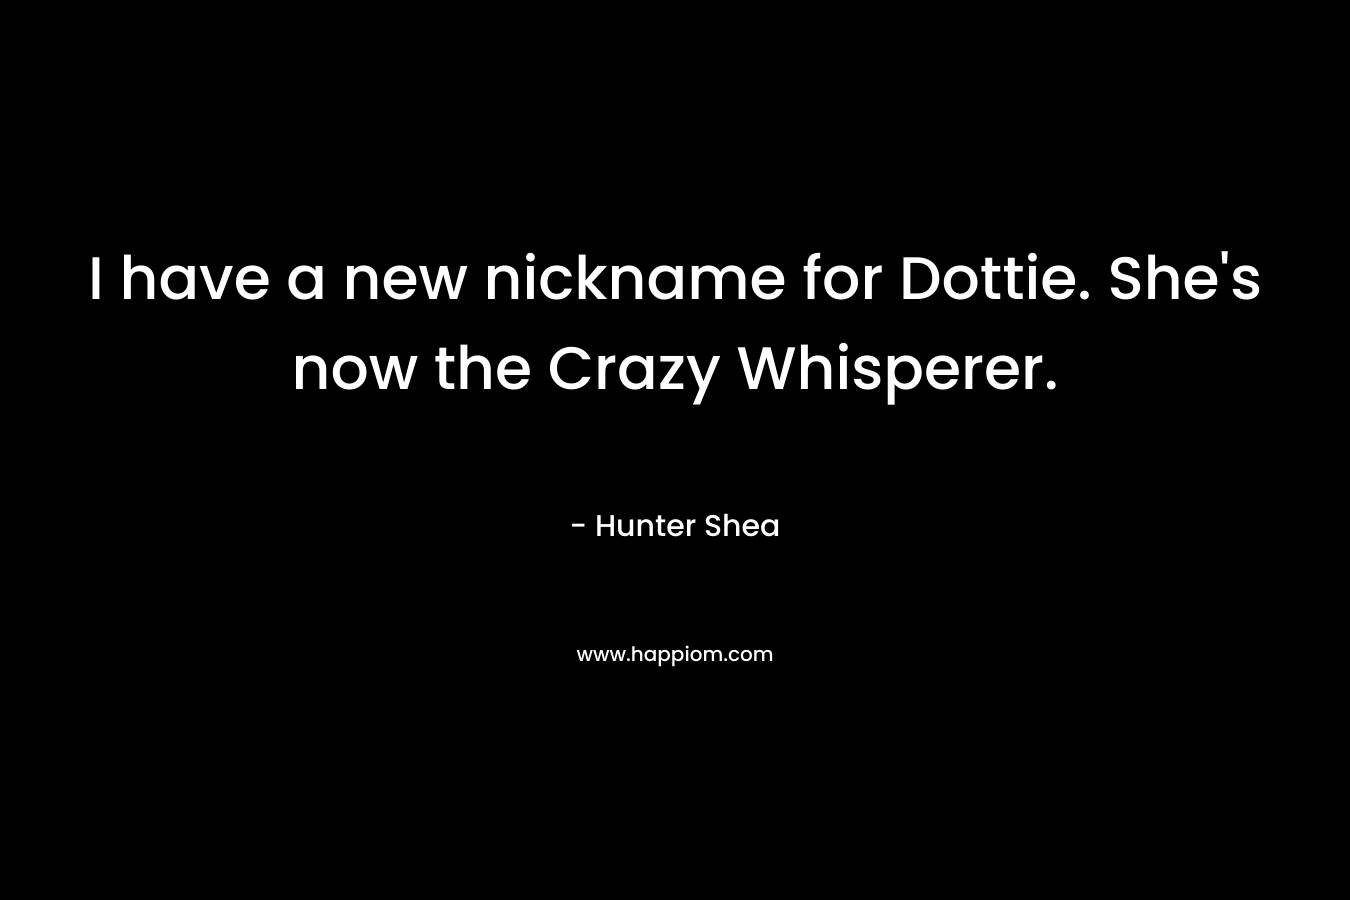 I have a new nickname for Dottie. She’s now the Crazy Whisperer. – Hunter Shea